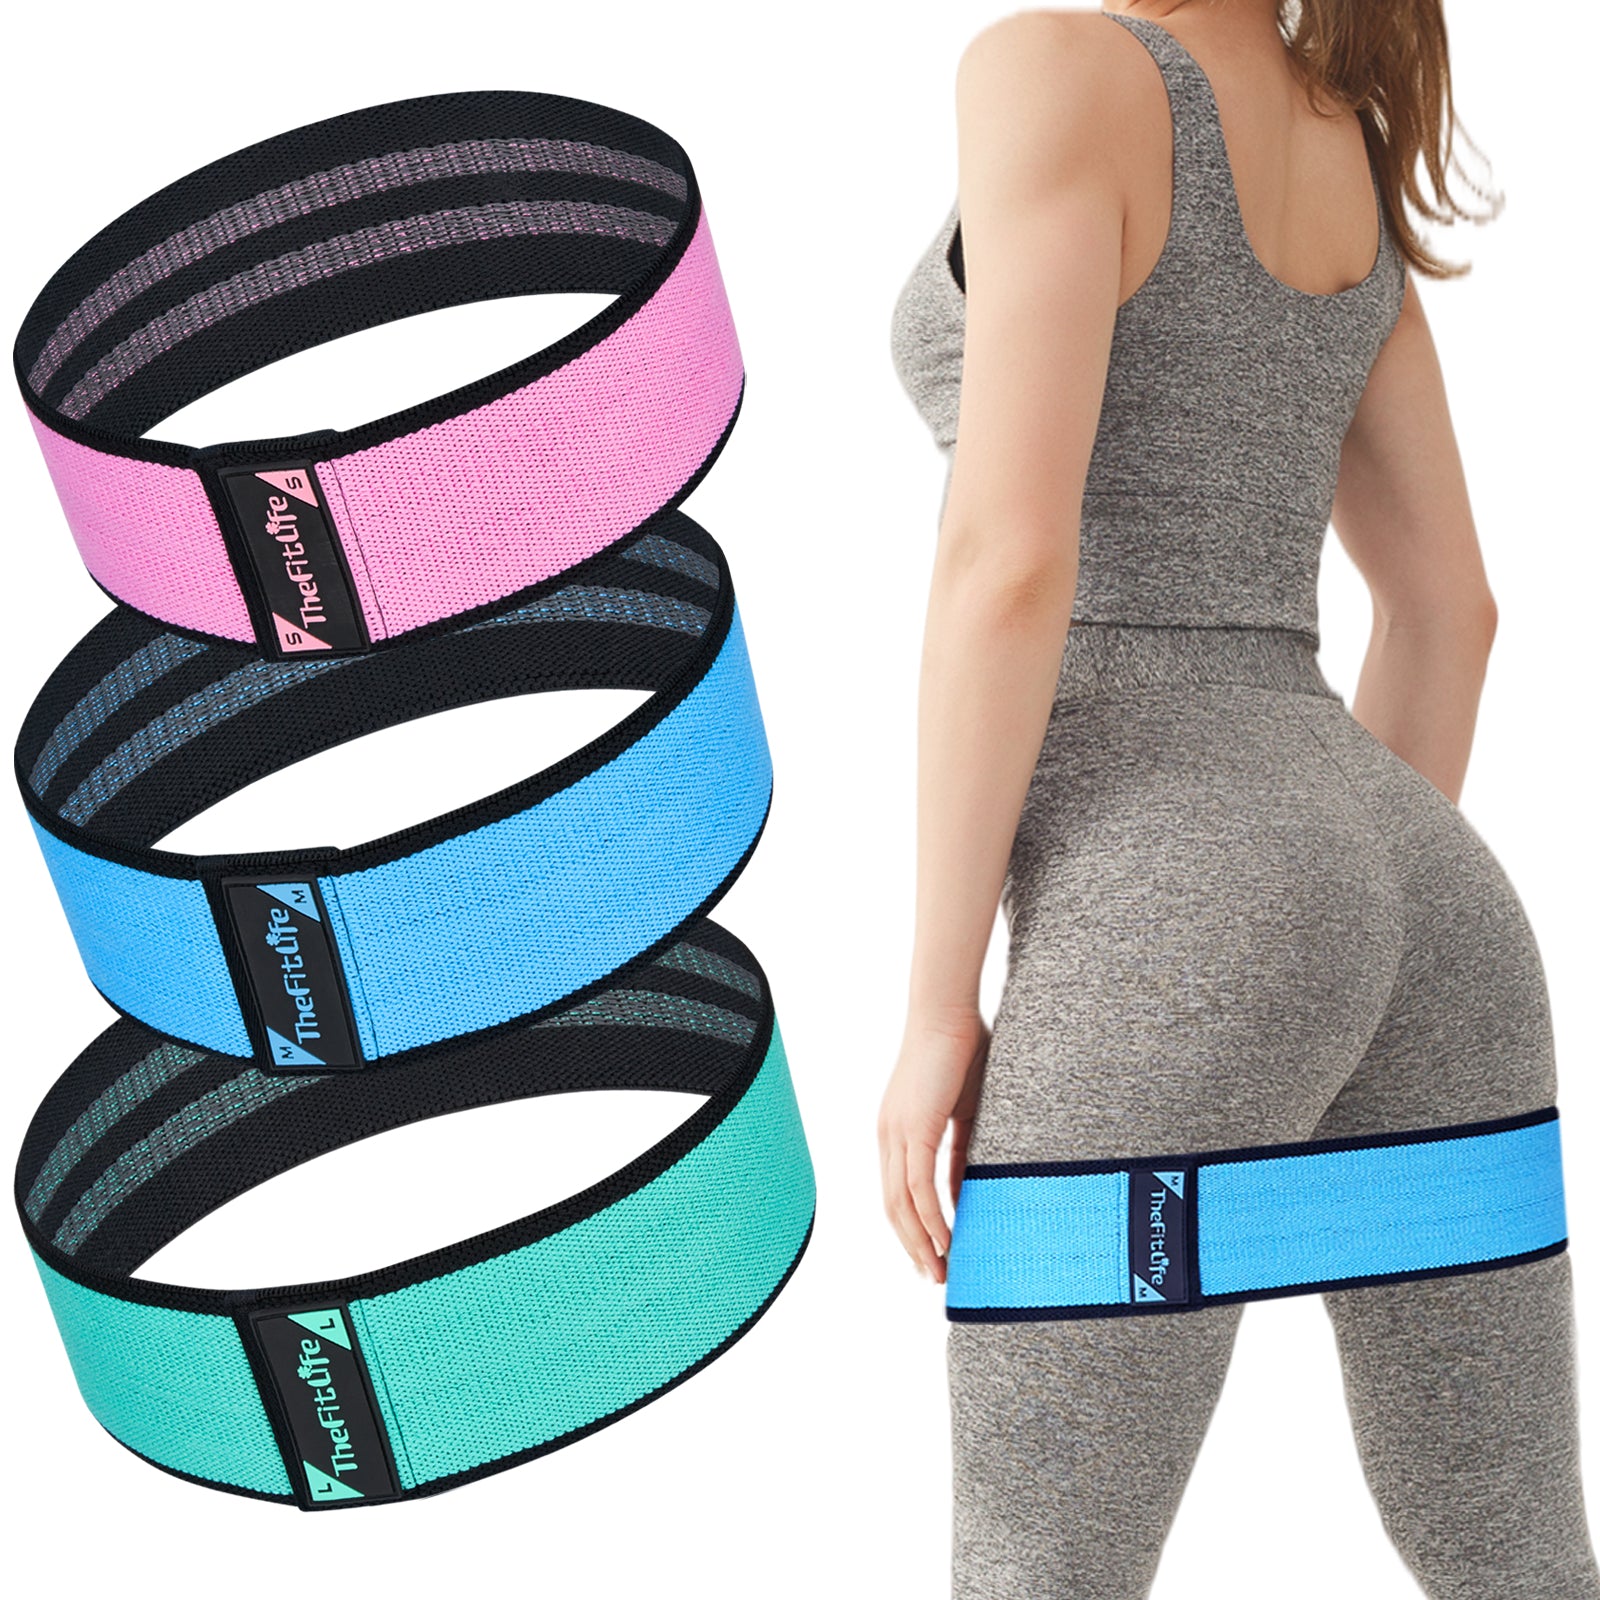 35 min Full Body Pilates Workout  Loop band + Mini Weights 